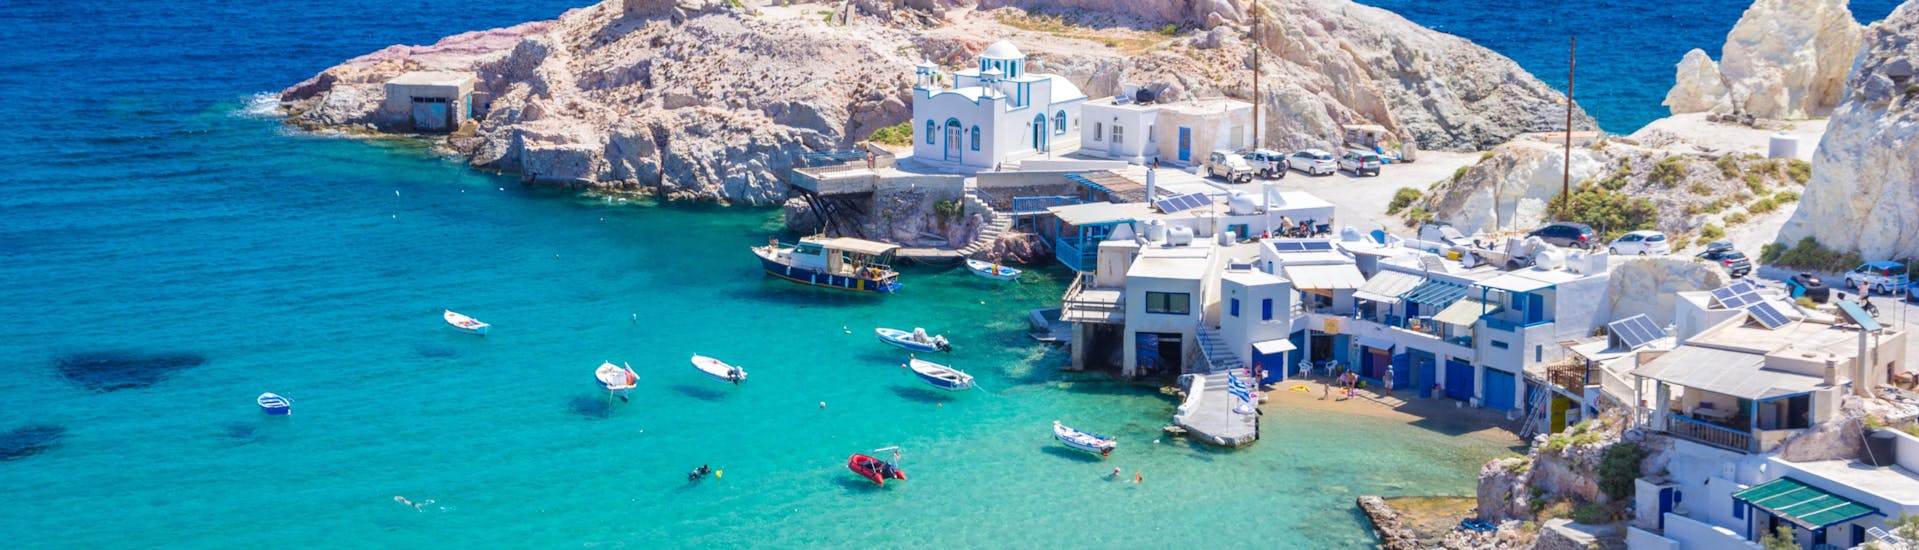 Beautiful view of Milos island during the summer with clear waters where boat trips providers anchor for swimming.